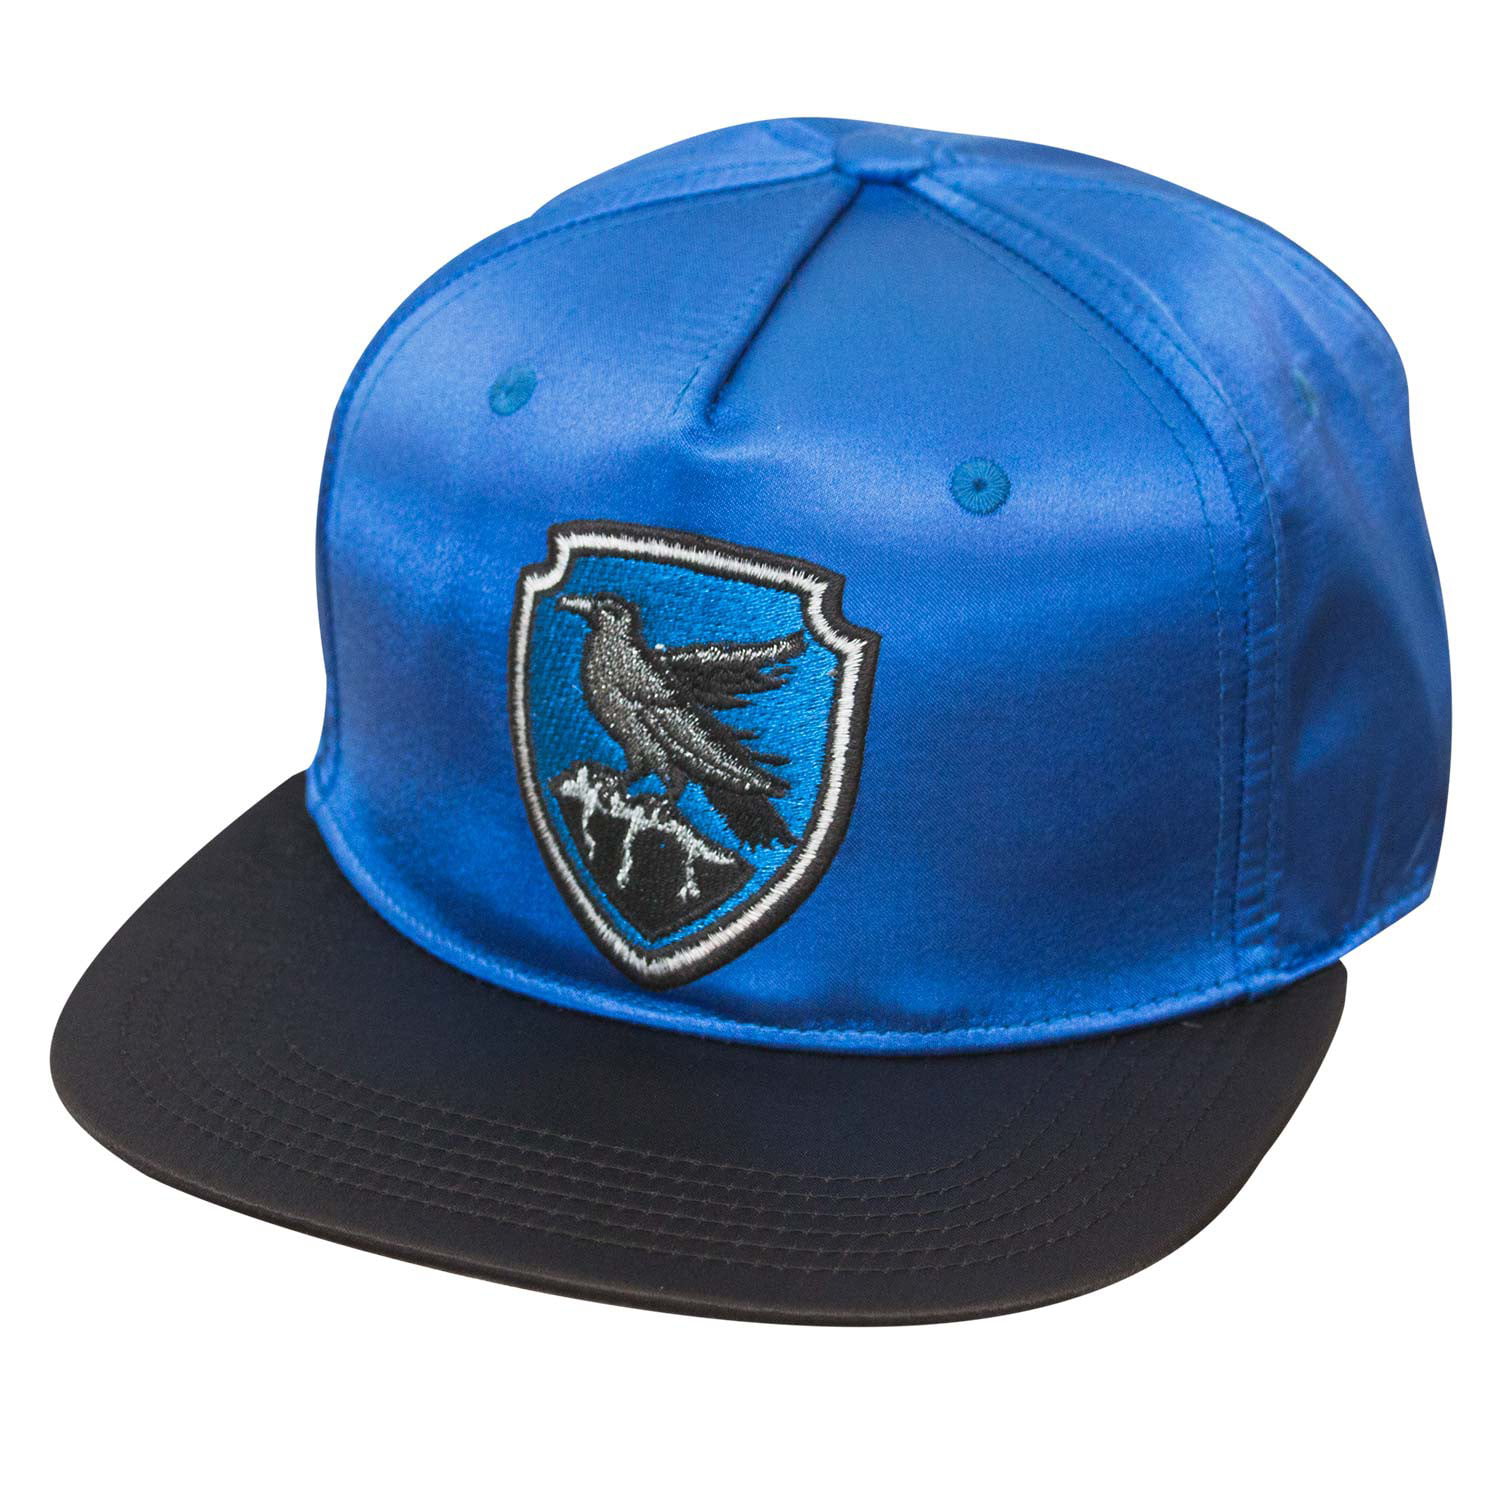 HARRY POTTER –RAVENCLAW BASEBALL HAT OFFICIALLY LICENSED 